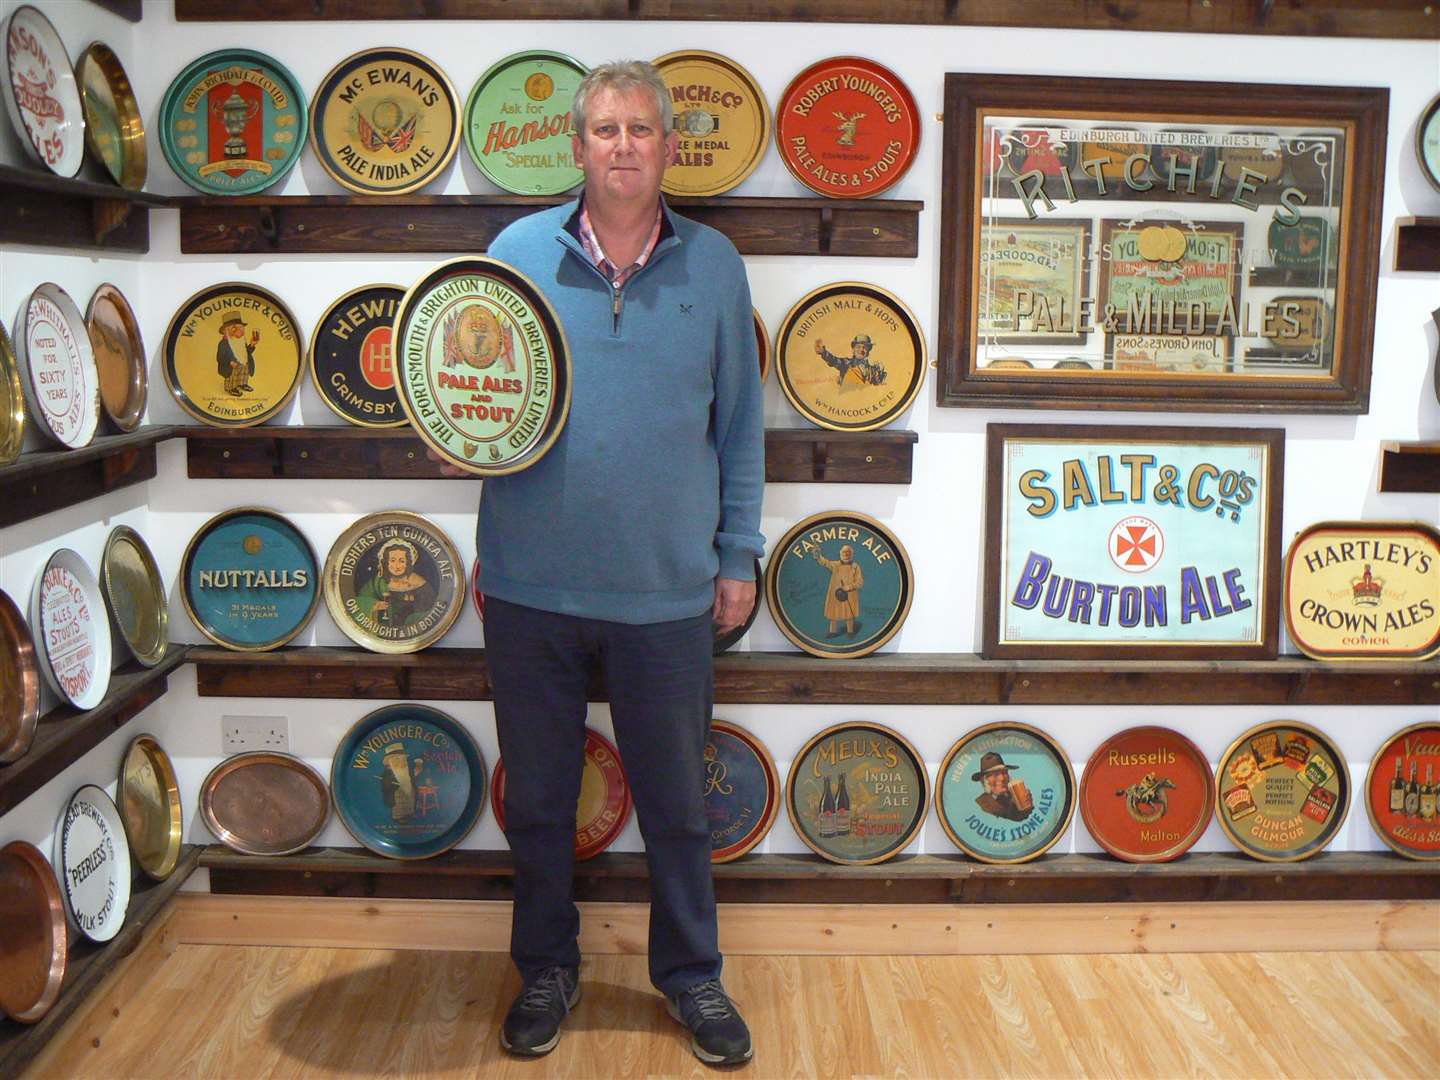 Richard with his collection